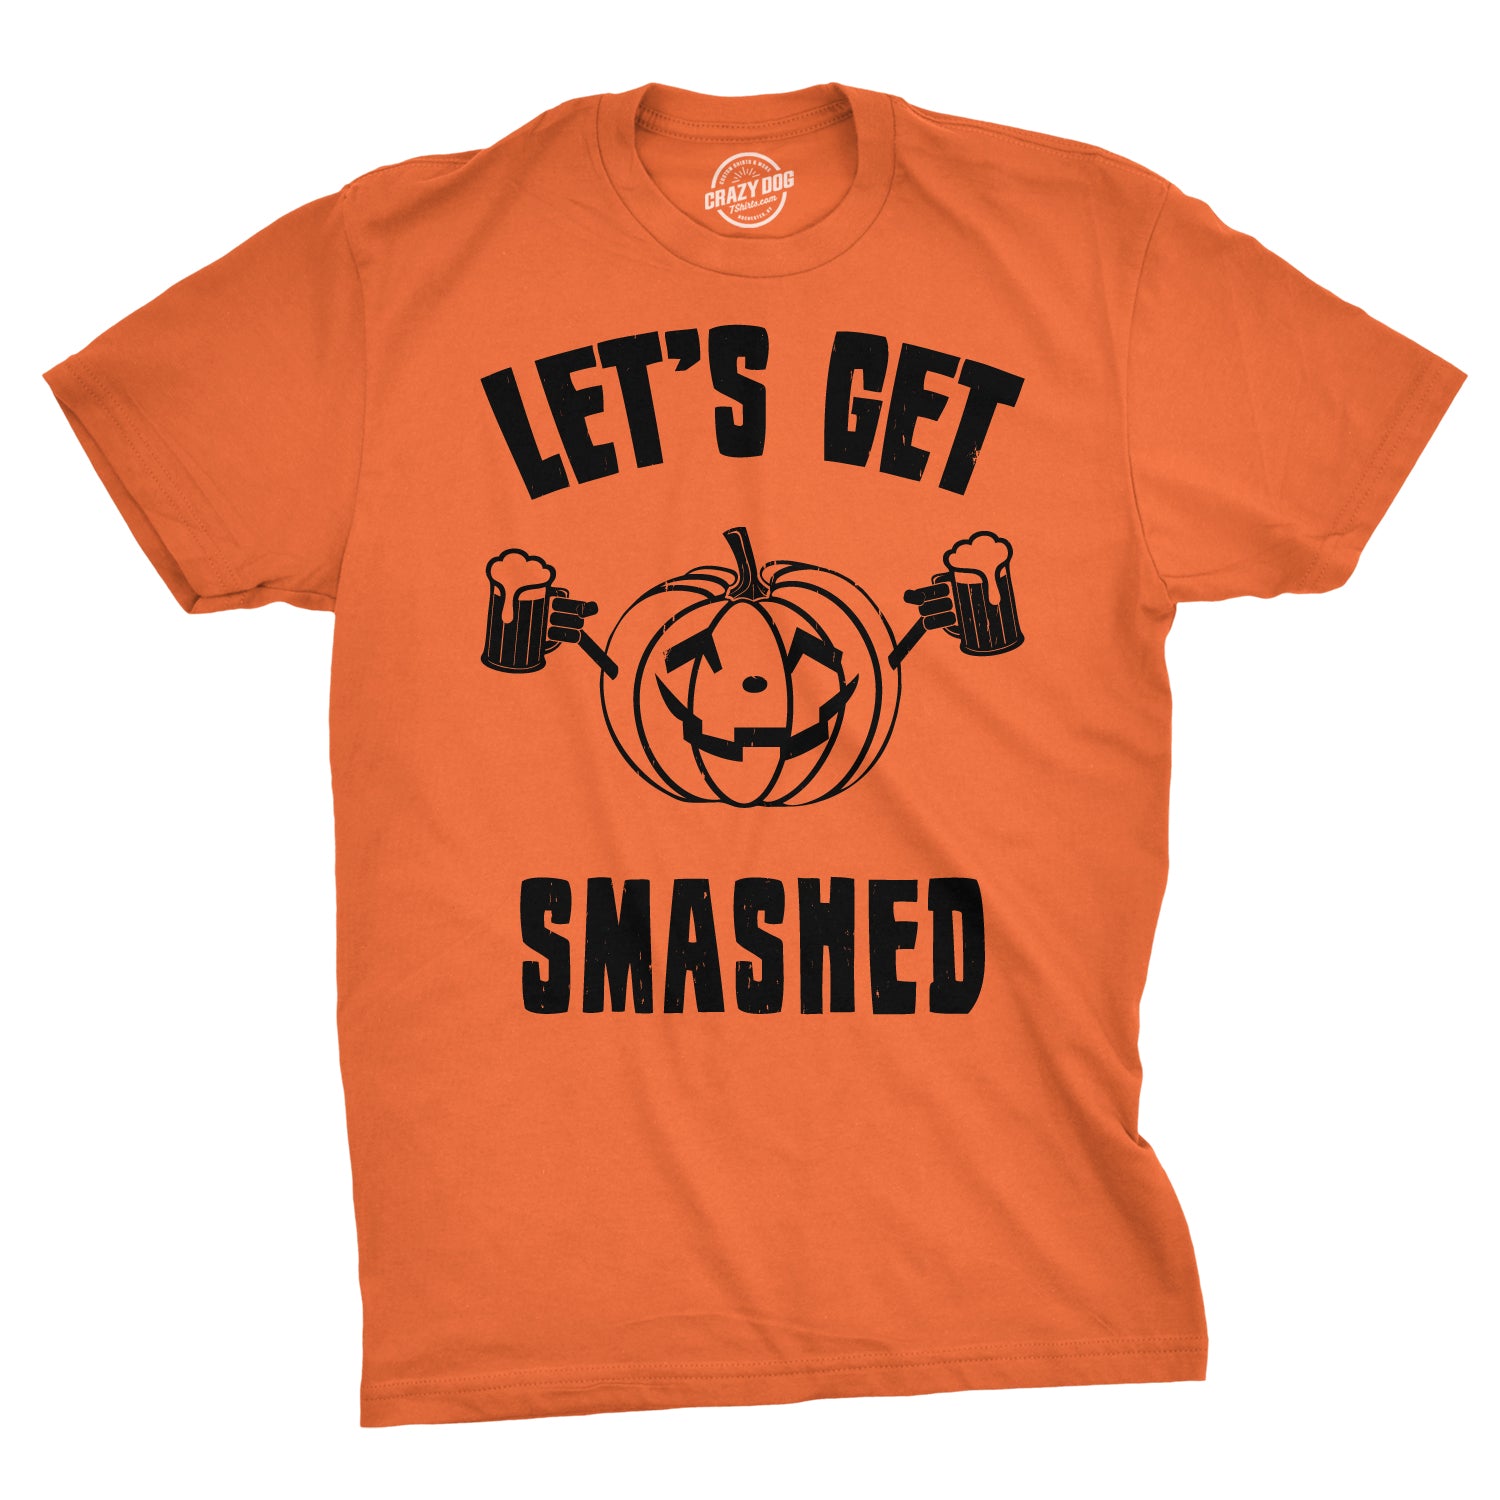 Funny Orange Let's Get Smashed Mens T Shirt Nerdy Halloween Drinking Tee